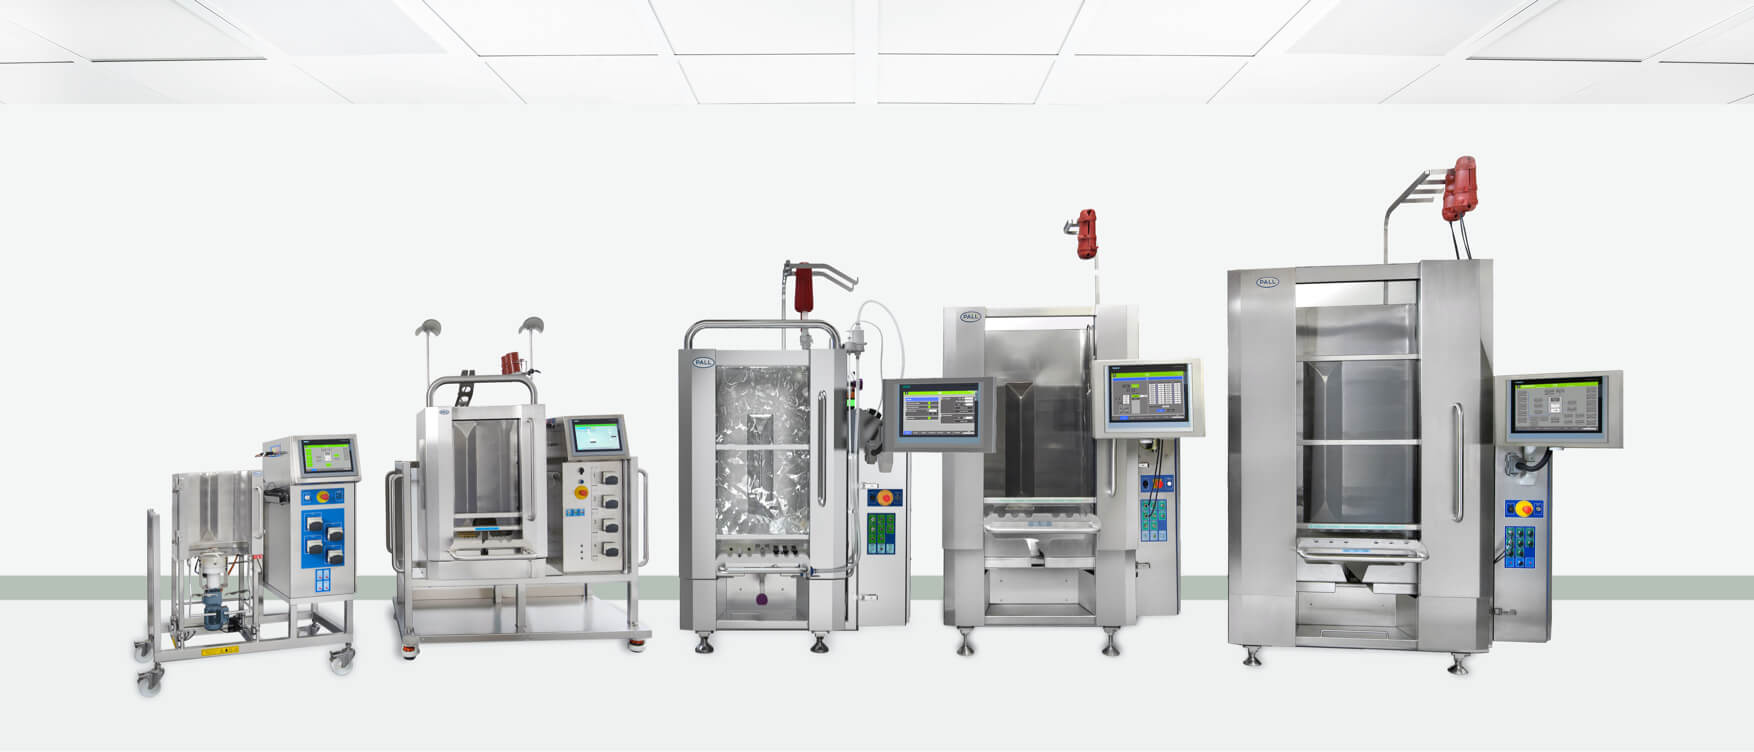 Image of equipment and machinery used in Scorpion's Texas cell therapy and biologic manufacturing and development facility in Texas, USA